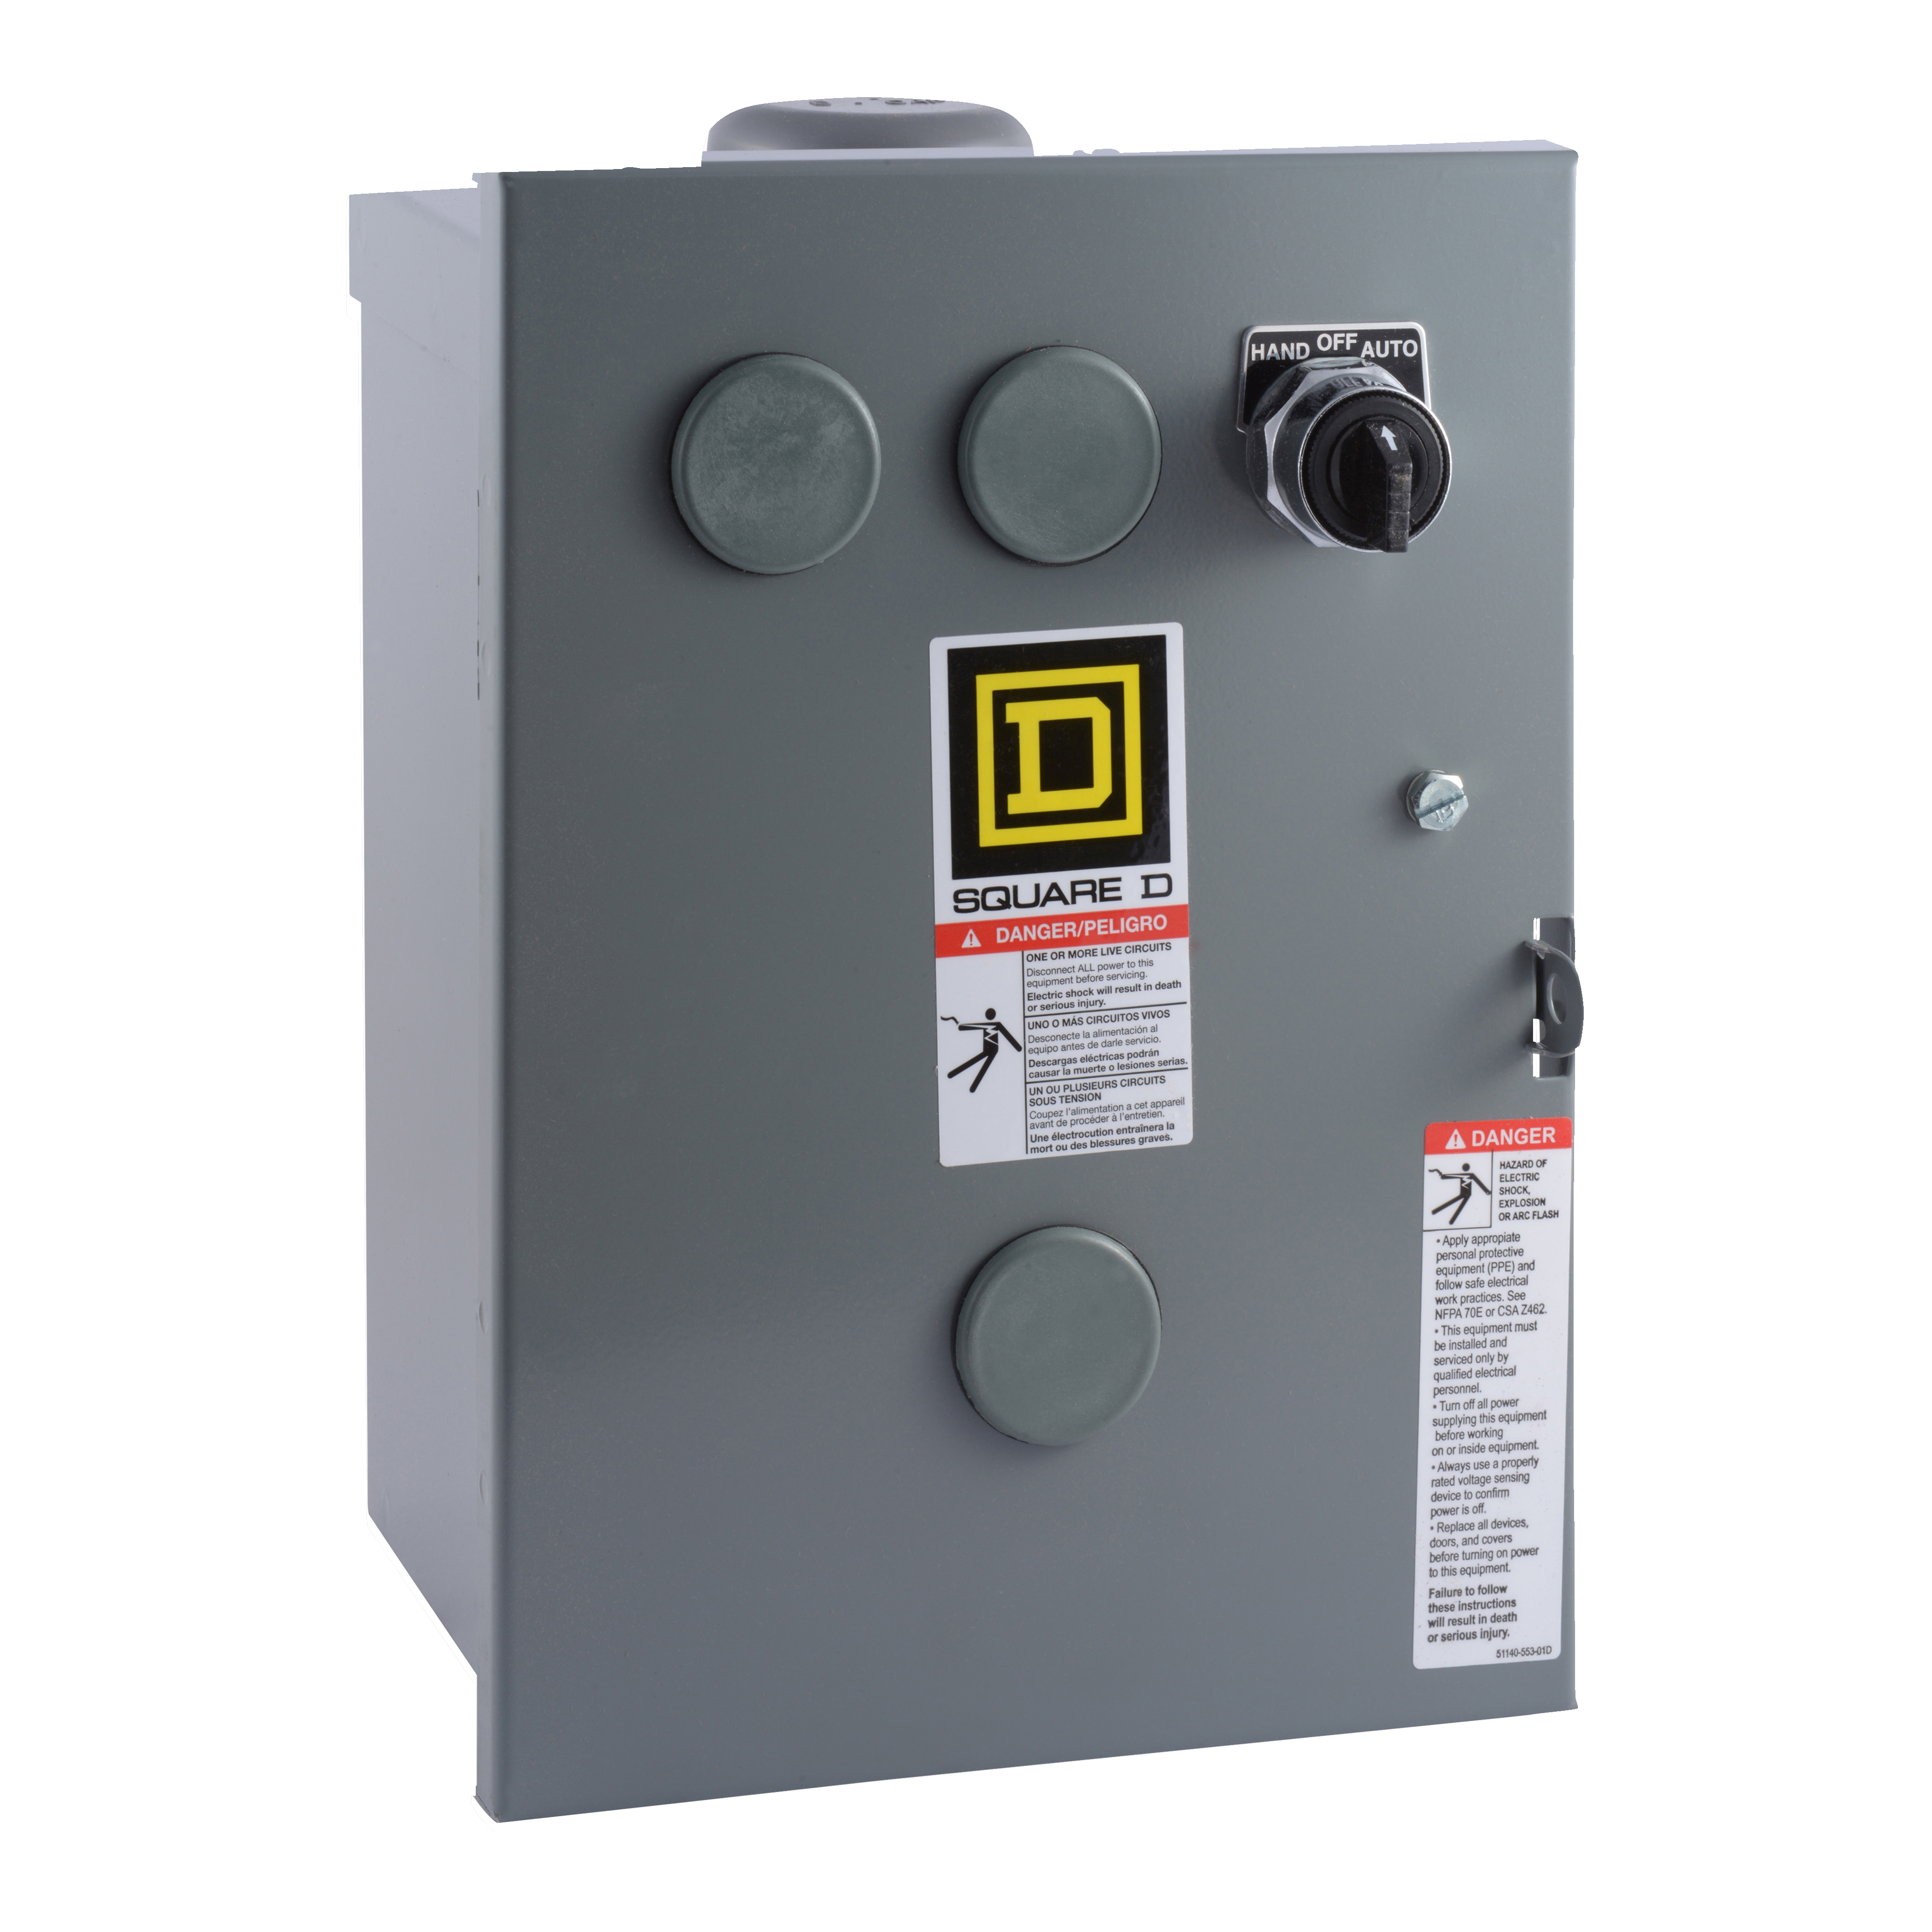 Contactor, Type S, multipole lighting, electrically held, 30A, 2 pole, 110/120 VAC 50/60 Hz coil, NEMA 3R, +options